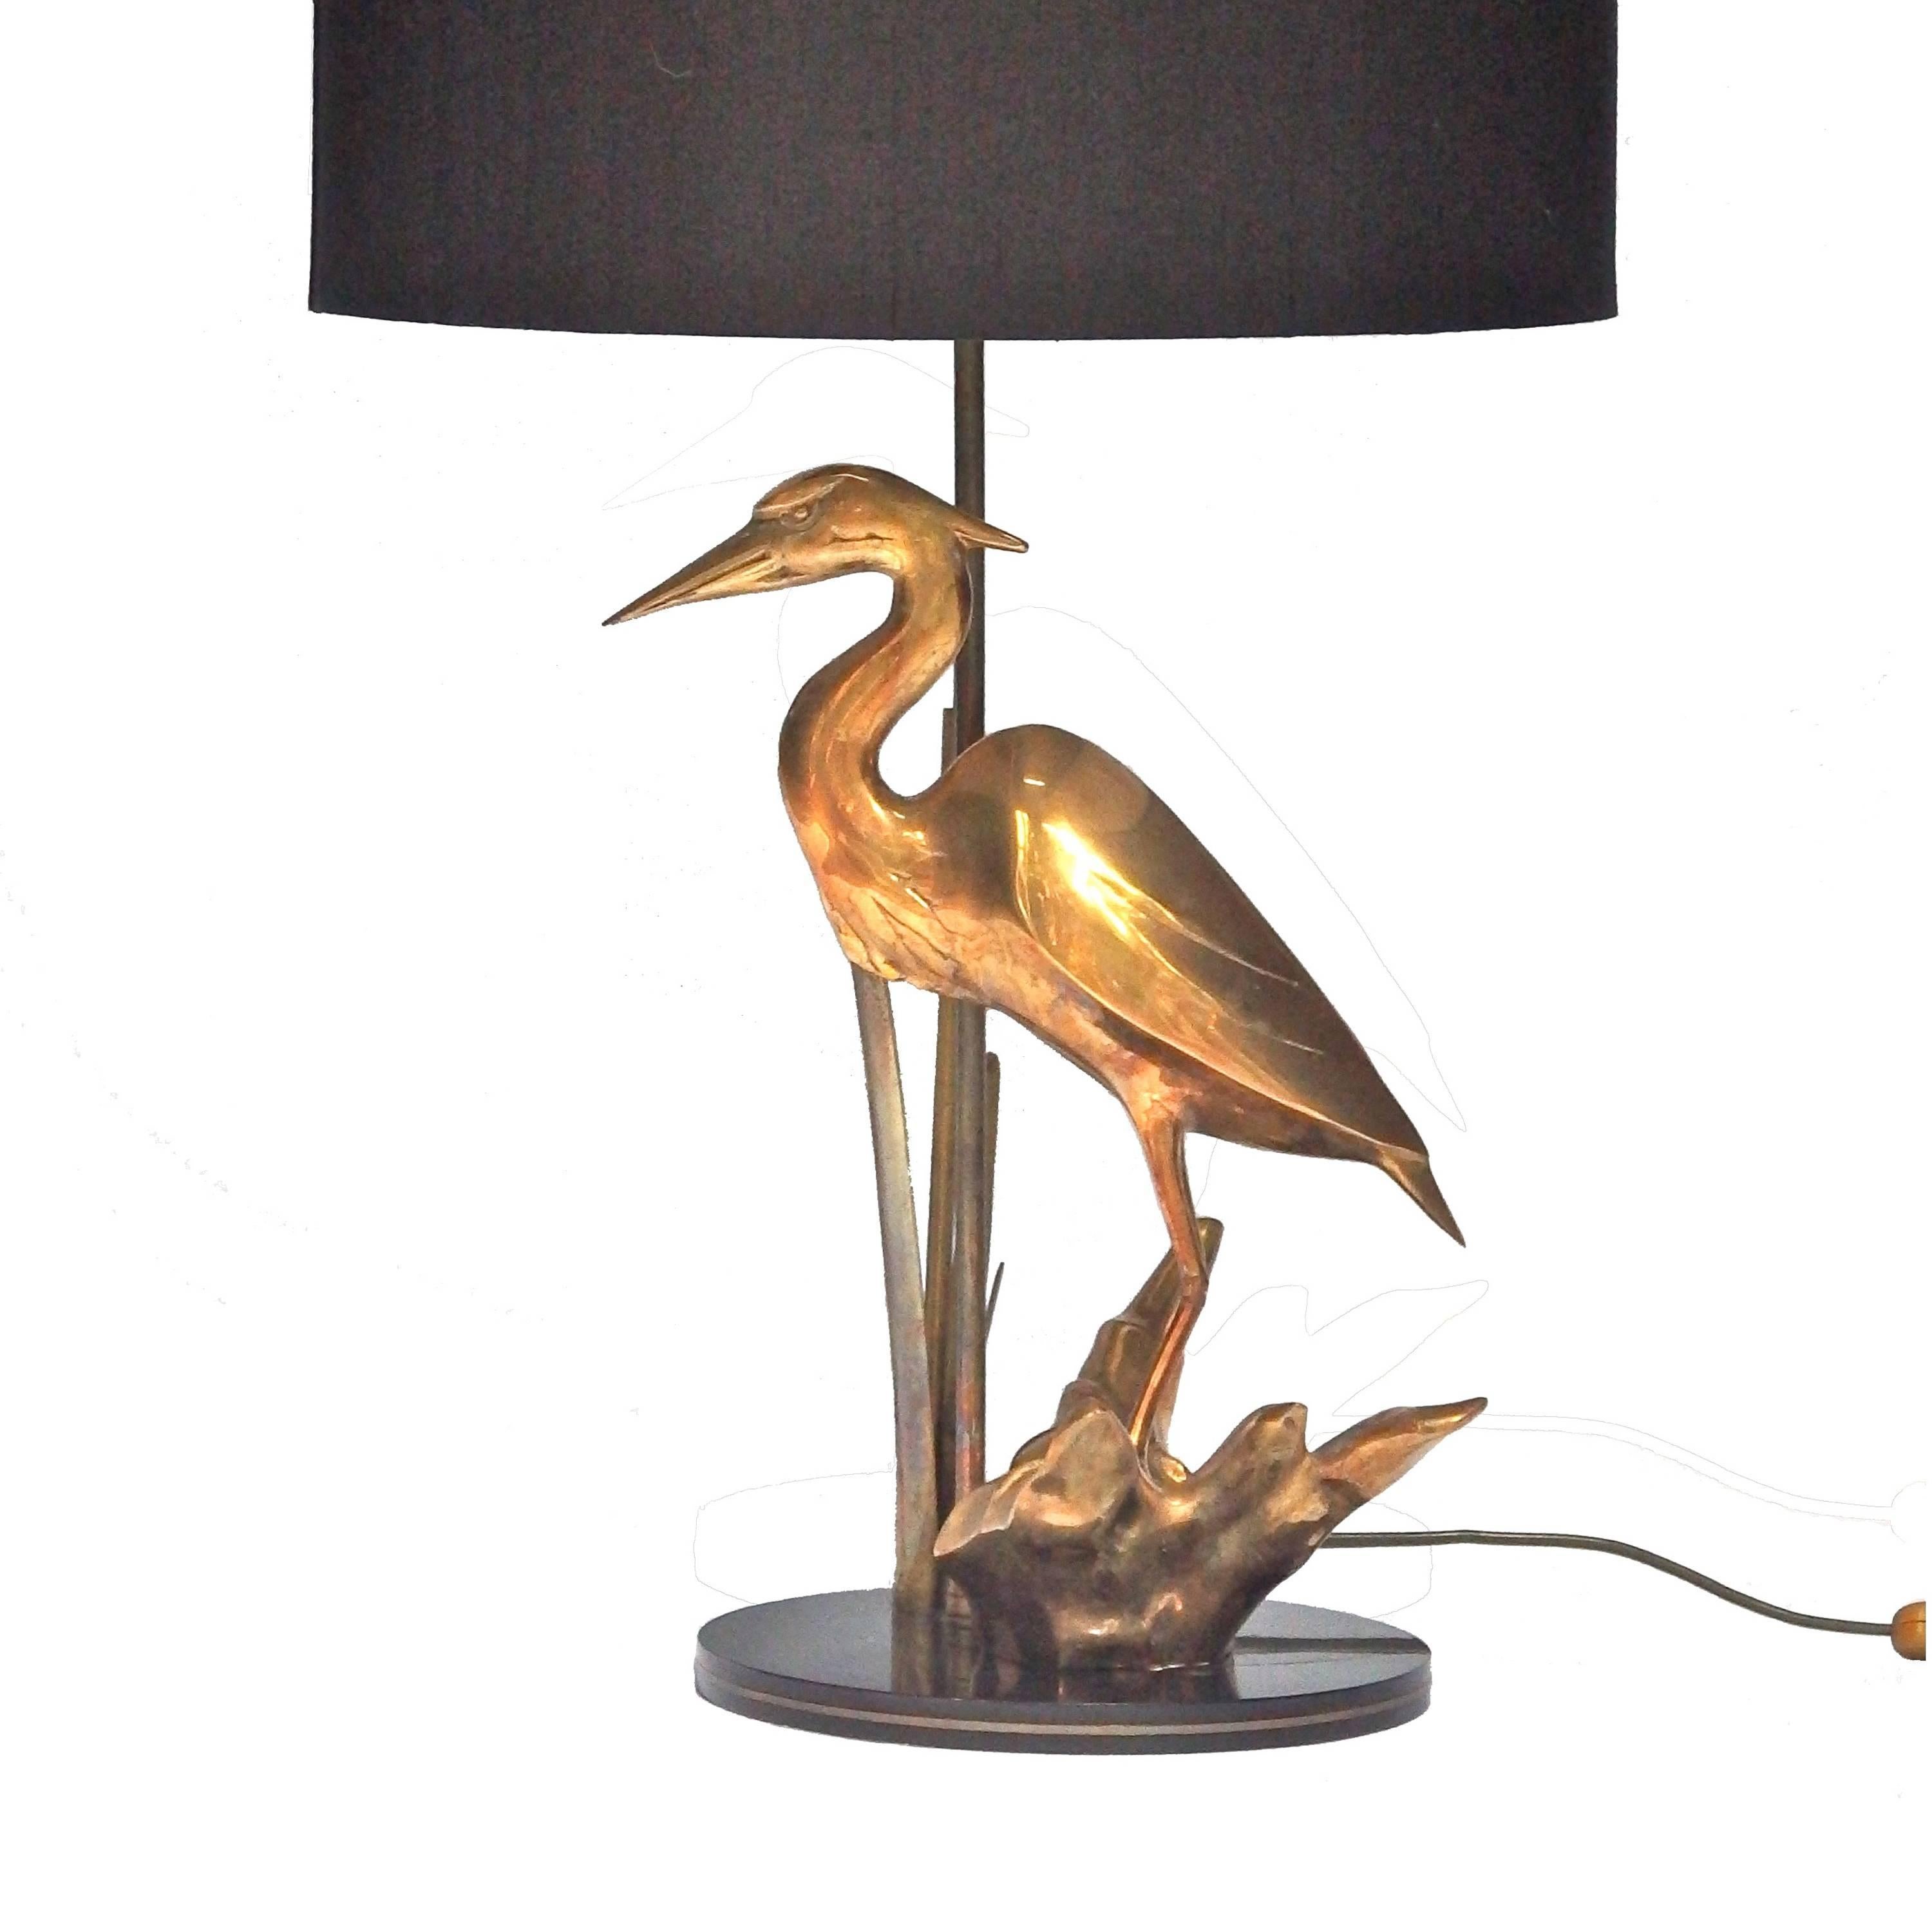 1970s French brass table lamp with heron and black silk shade.
Measure: Total height inclusive the shade is 66cm and diameter shade is 40cm.